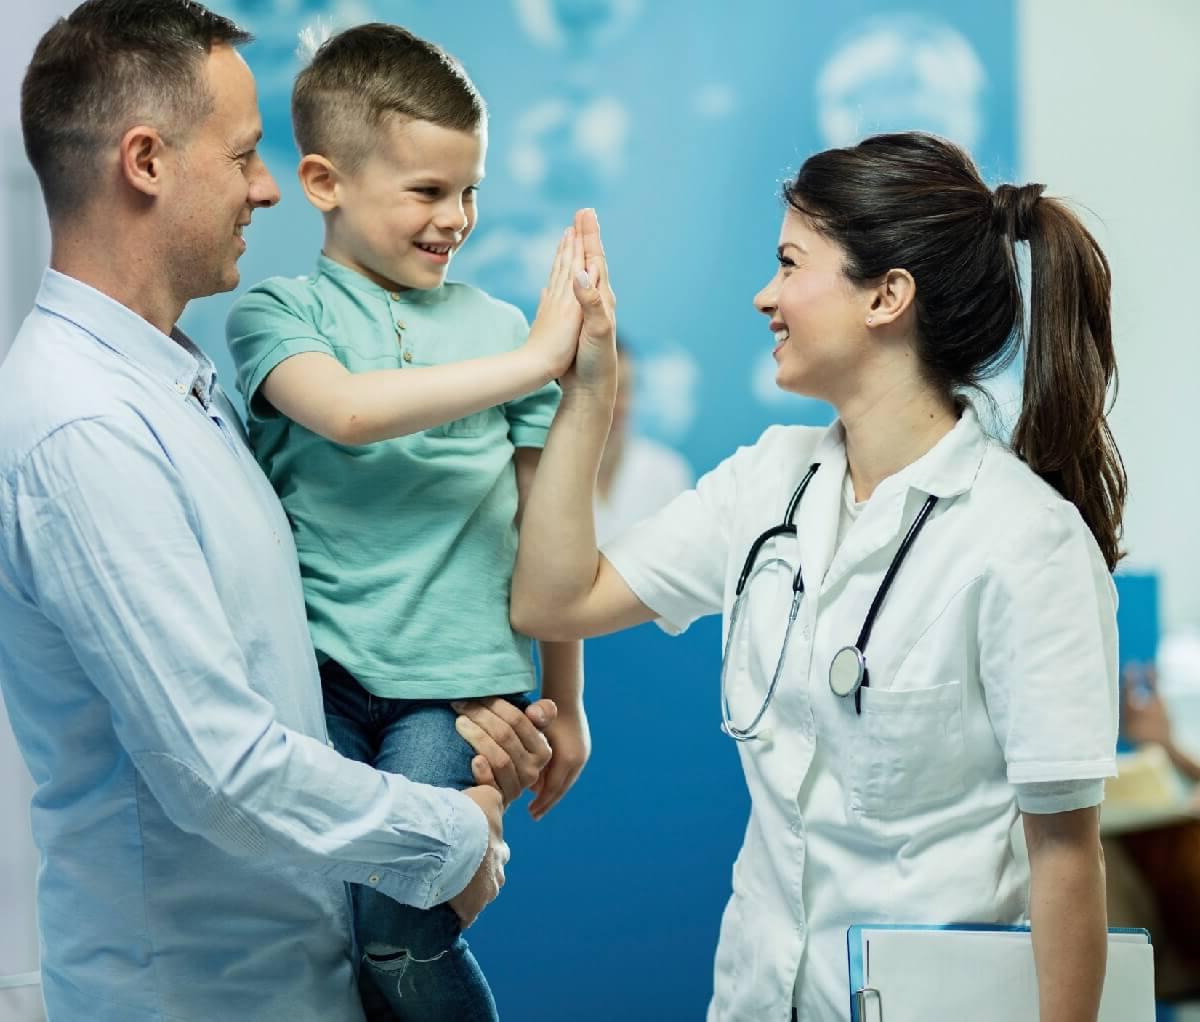 APRN with 邮政硕士证书 High Fiving Child Patient